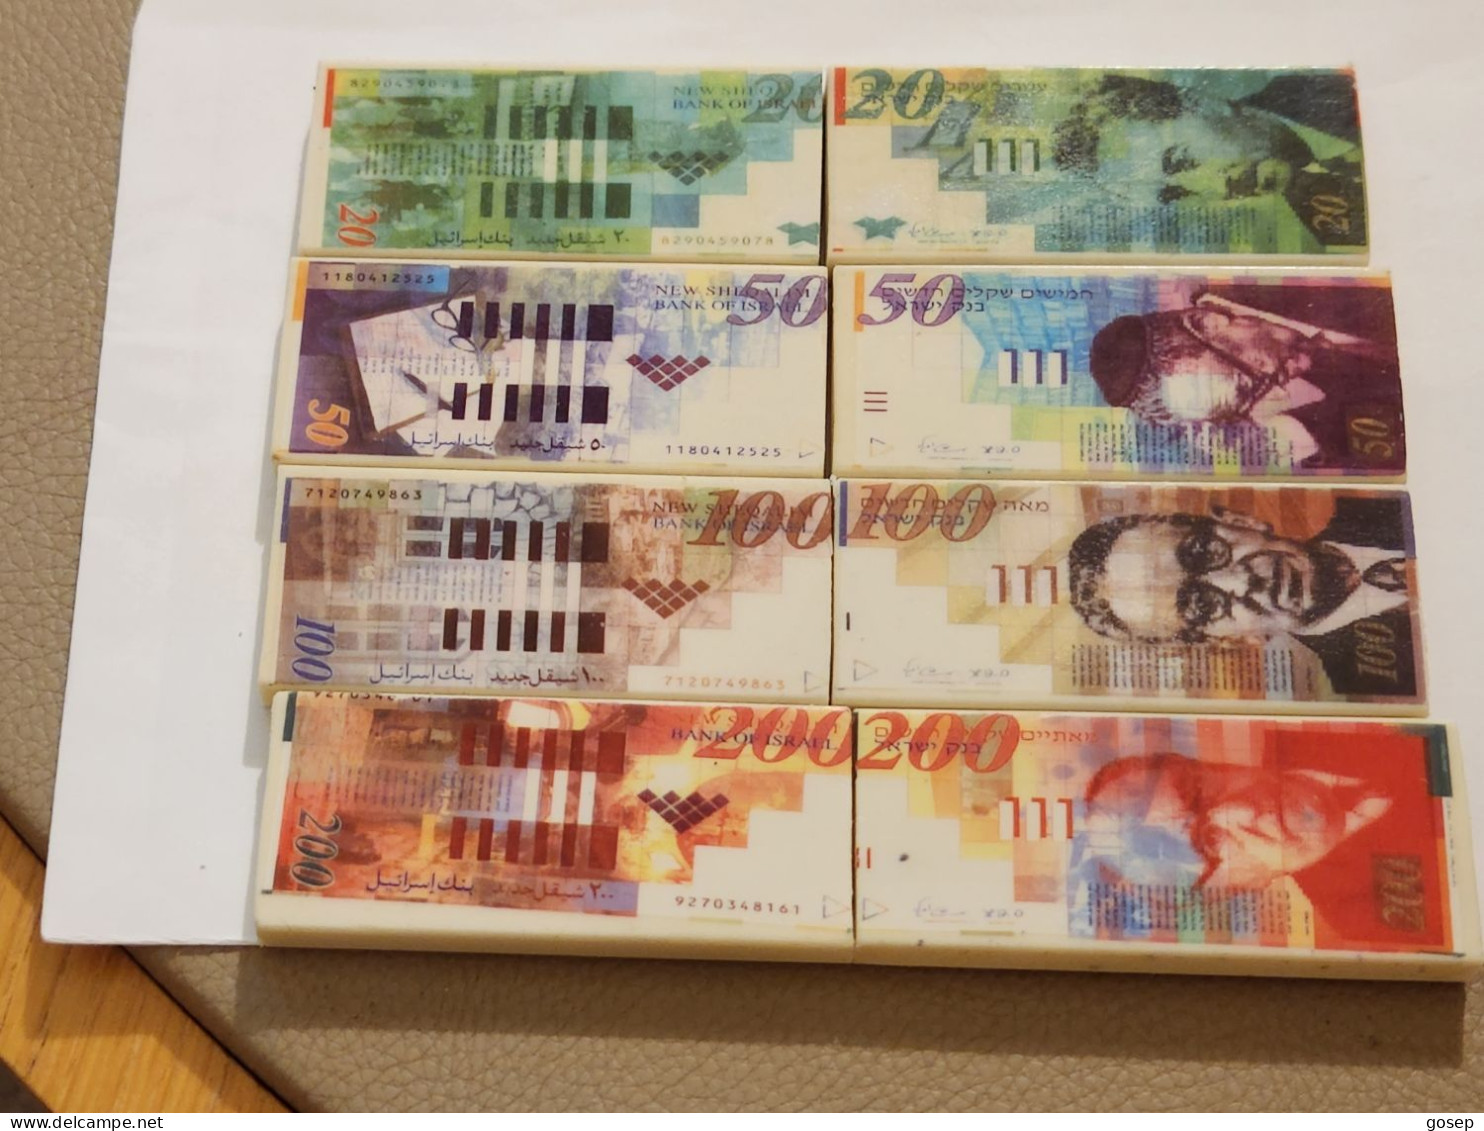 ISRAEL-An Eraser That Erases After Writing In Pencil - The Eraser Has Pictures Of Israeli Banknotes On Both Sides-4note - Israel